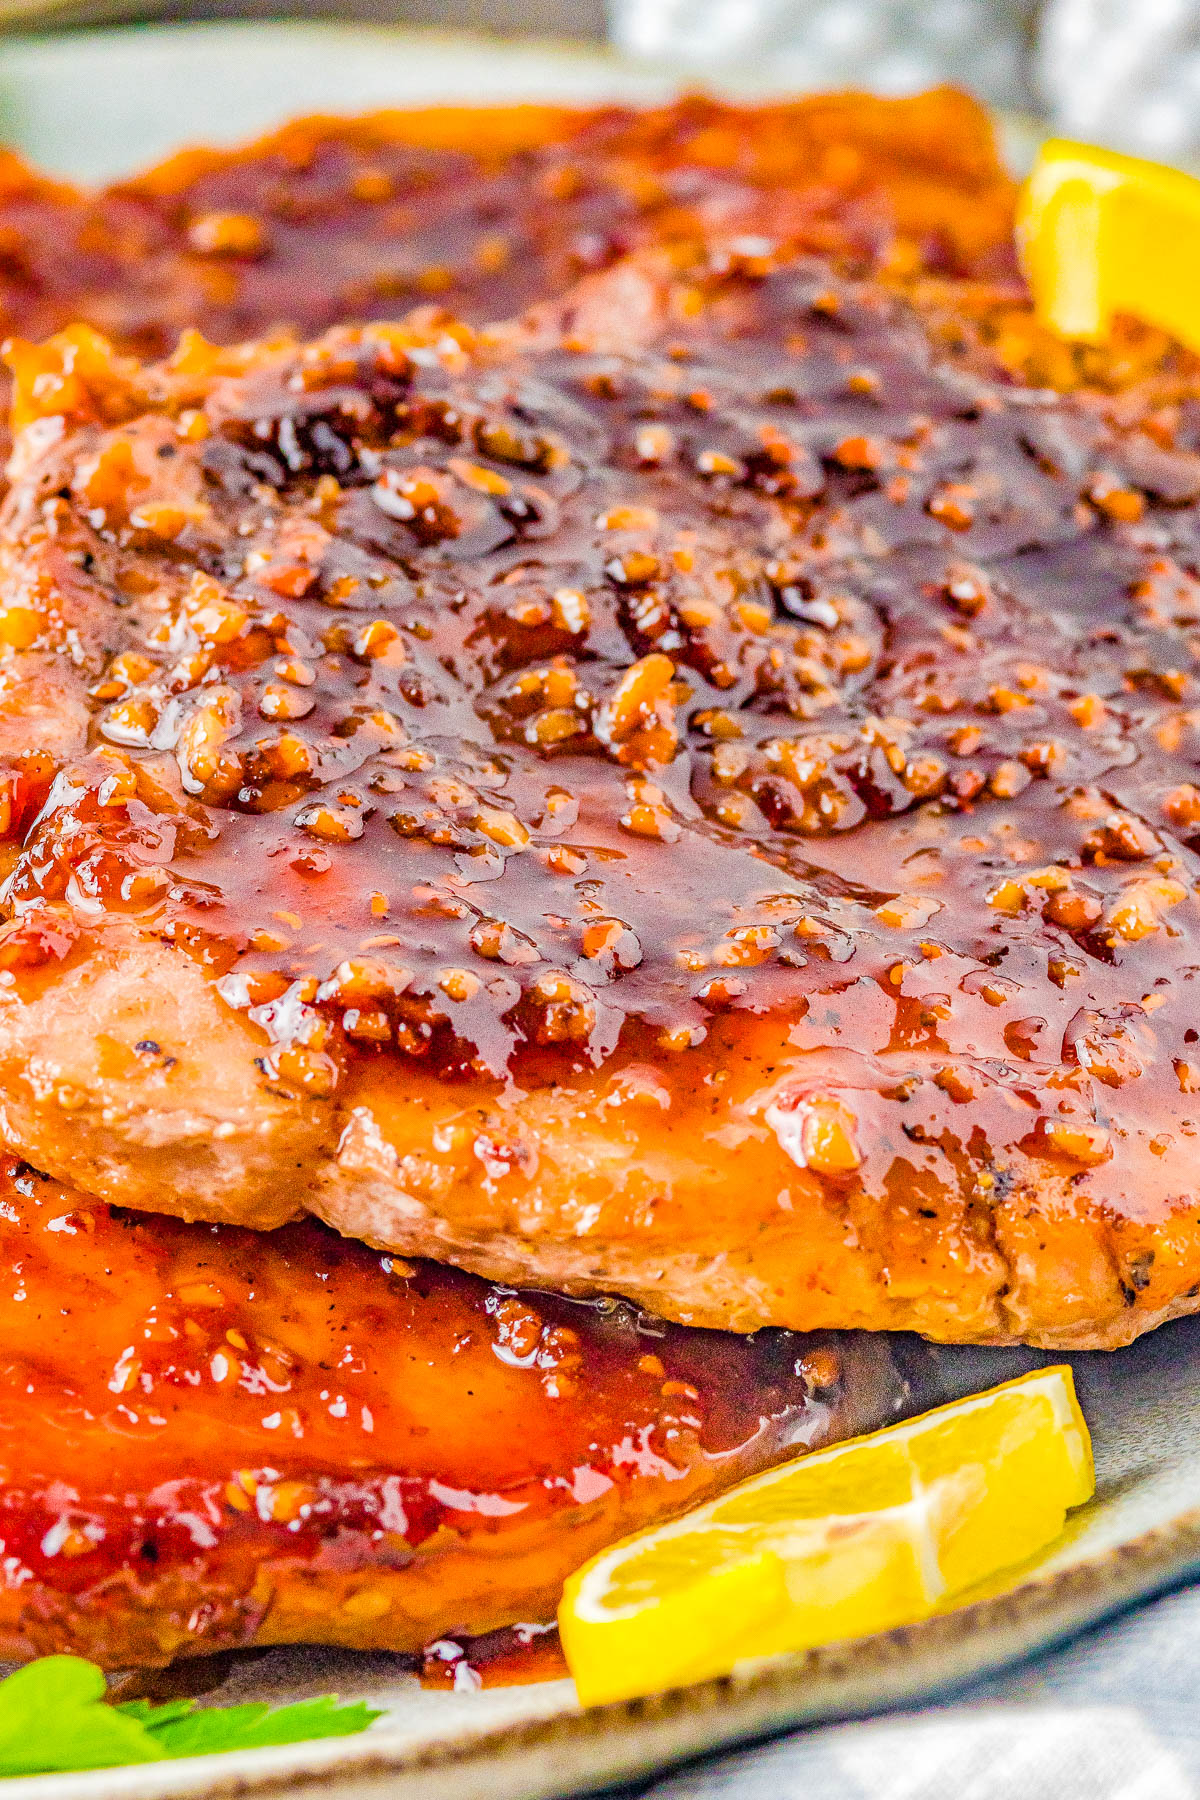 Maple Glazed Pork Chops and Sweet Potatoes - The PERFECT fall-inspired dinner with juicy pork chops that are smothered with the most mouthwatering maple bourbon glaze and cinnamon-and-spiced roasted sweet potatoes on the side! This stunning comfort food recipe is great for family dinners and busy weeknights because it's EASY to make!  